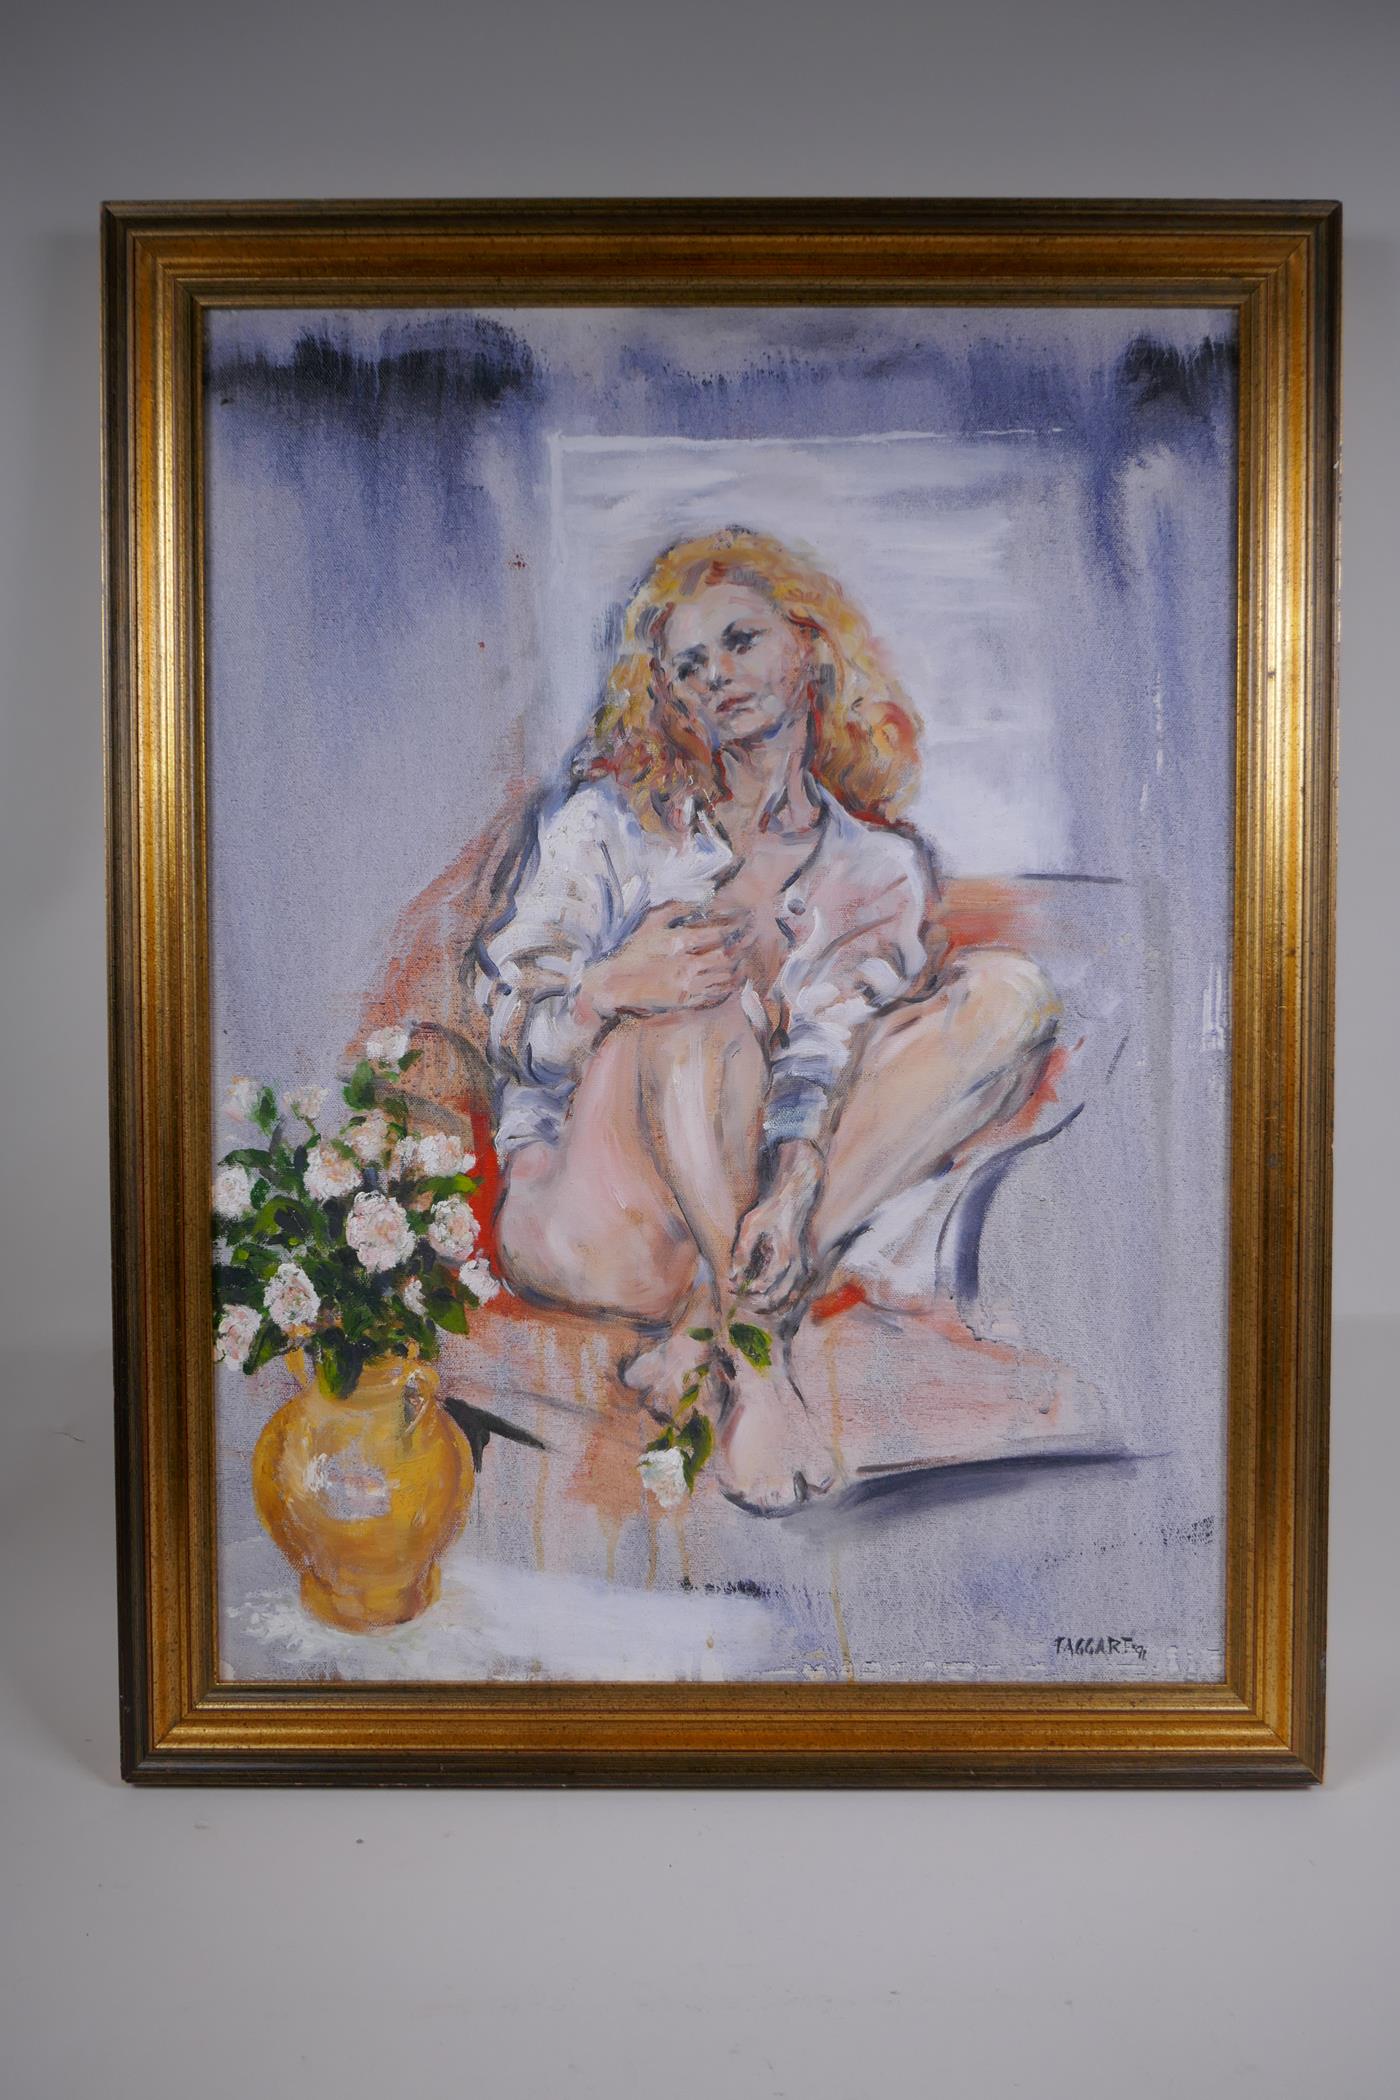 Elizabeth Taggart, (Irish, b.1943), portrait of a seated woman, oil on canvas, signed and dated - Image 2 of 3